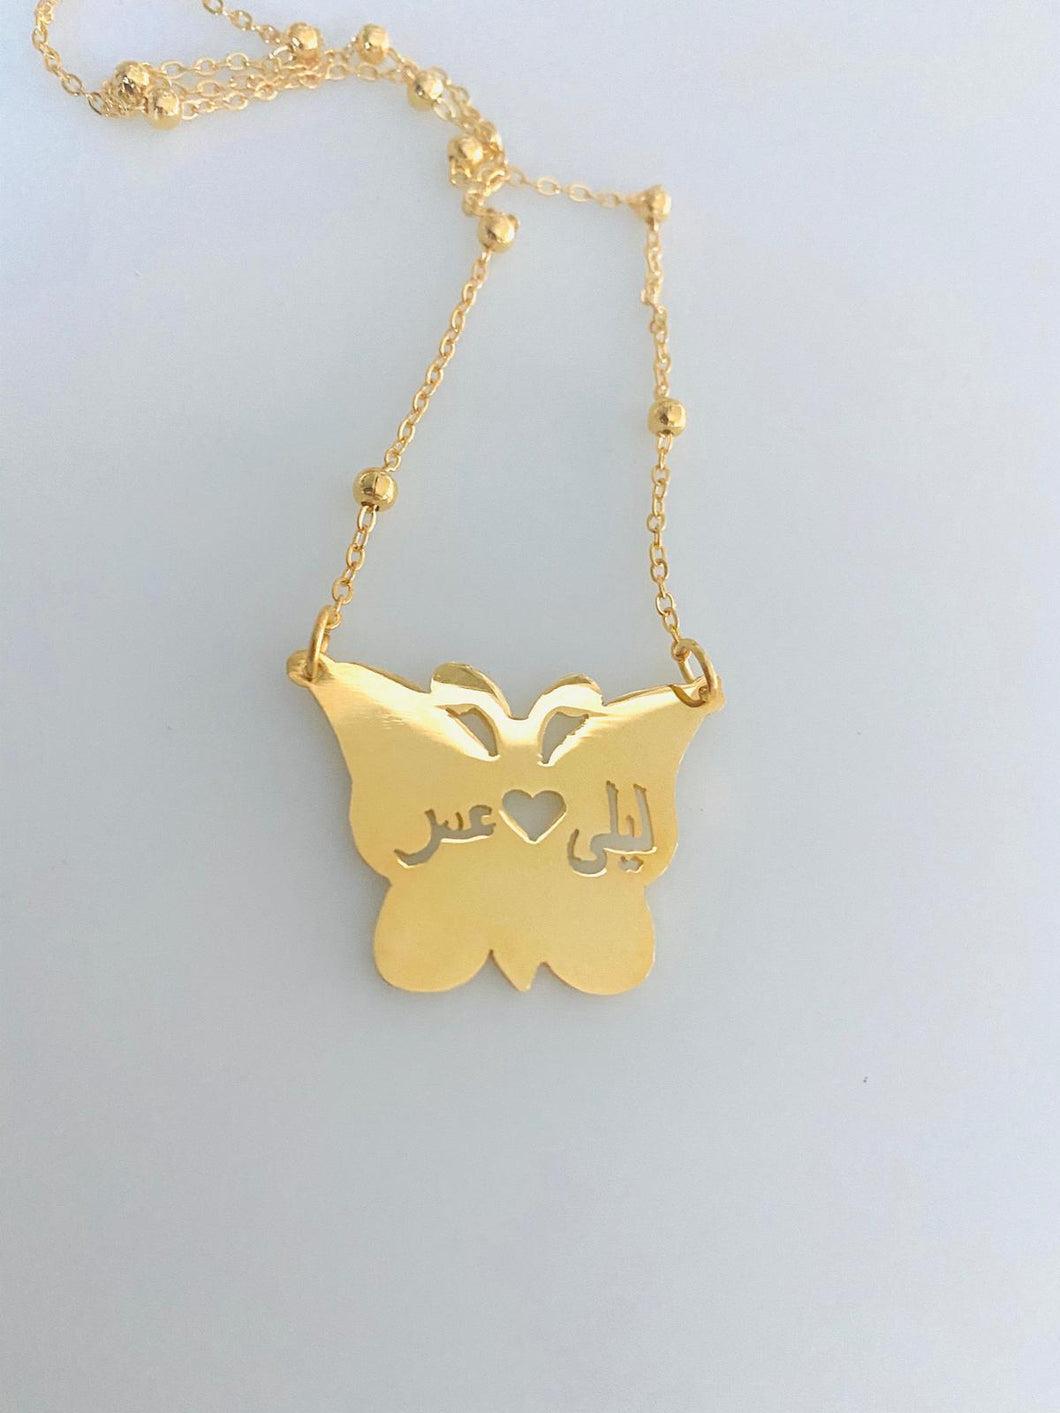 2 name necklace - couples name butterfly